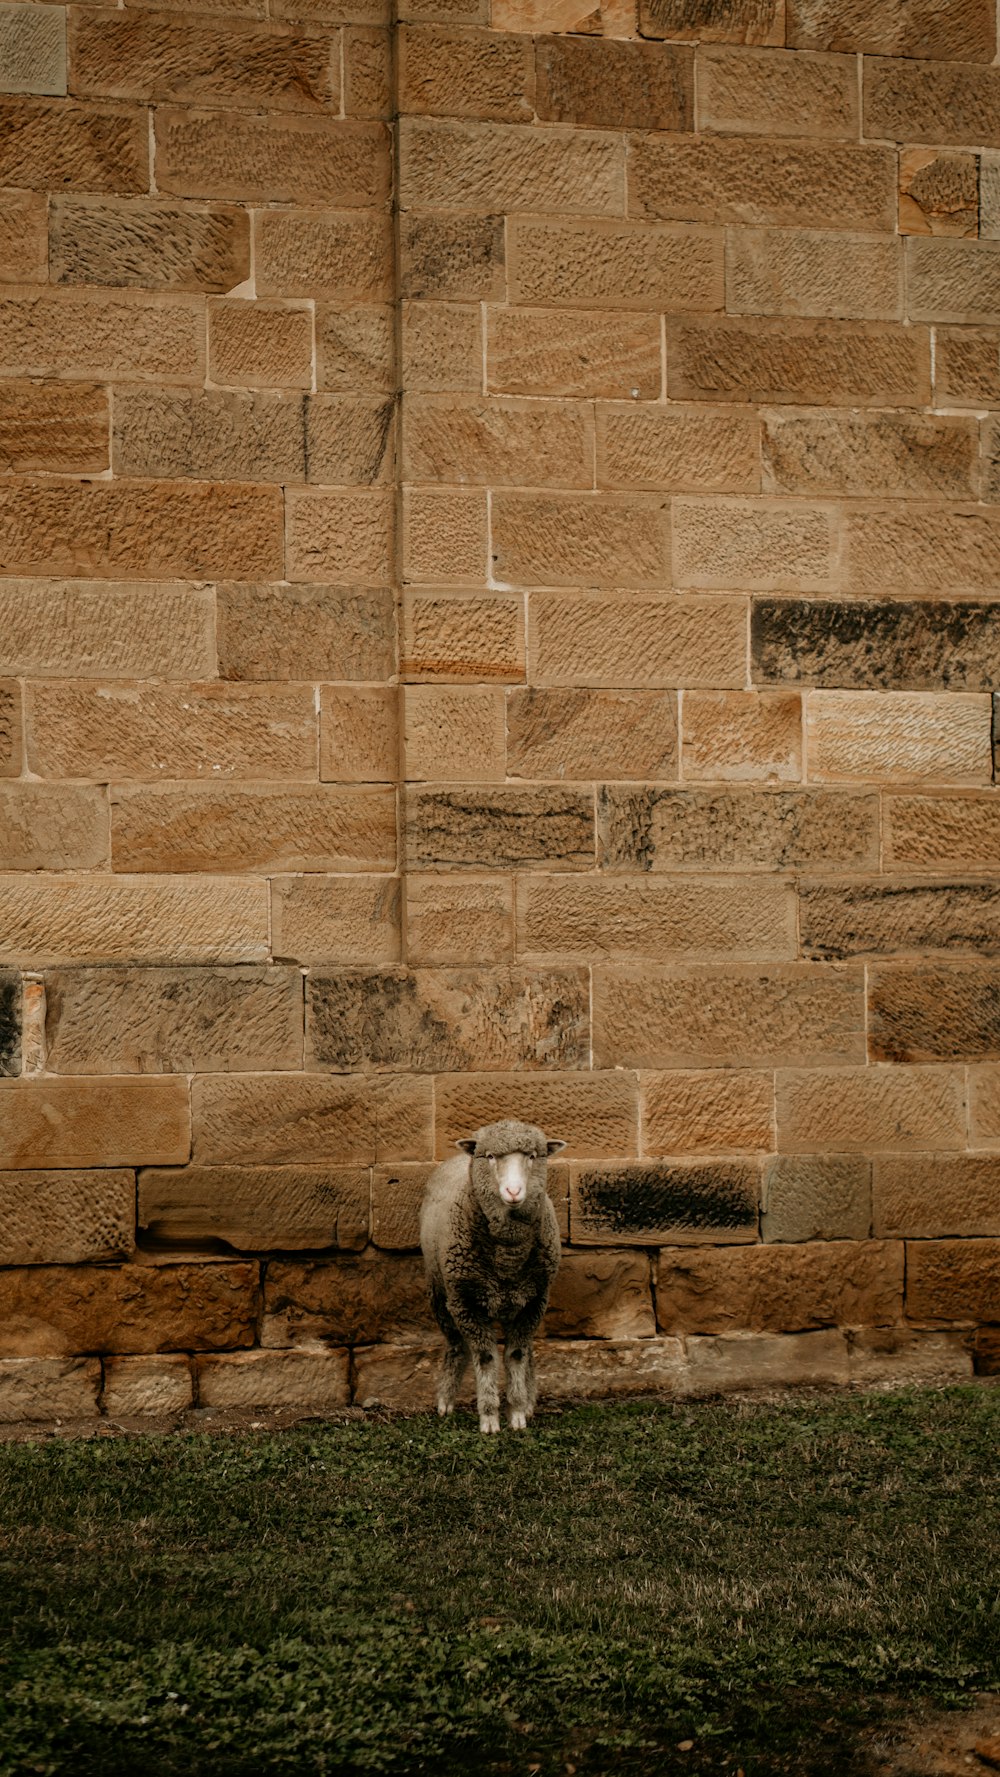 a sheep standing in front of a brick wall